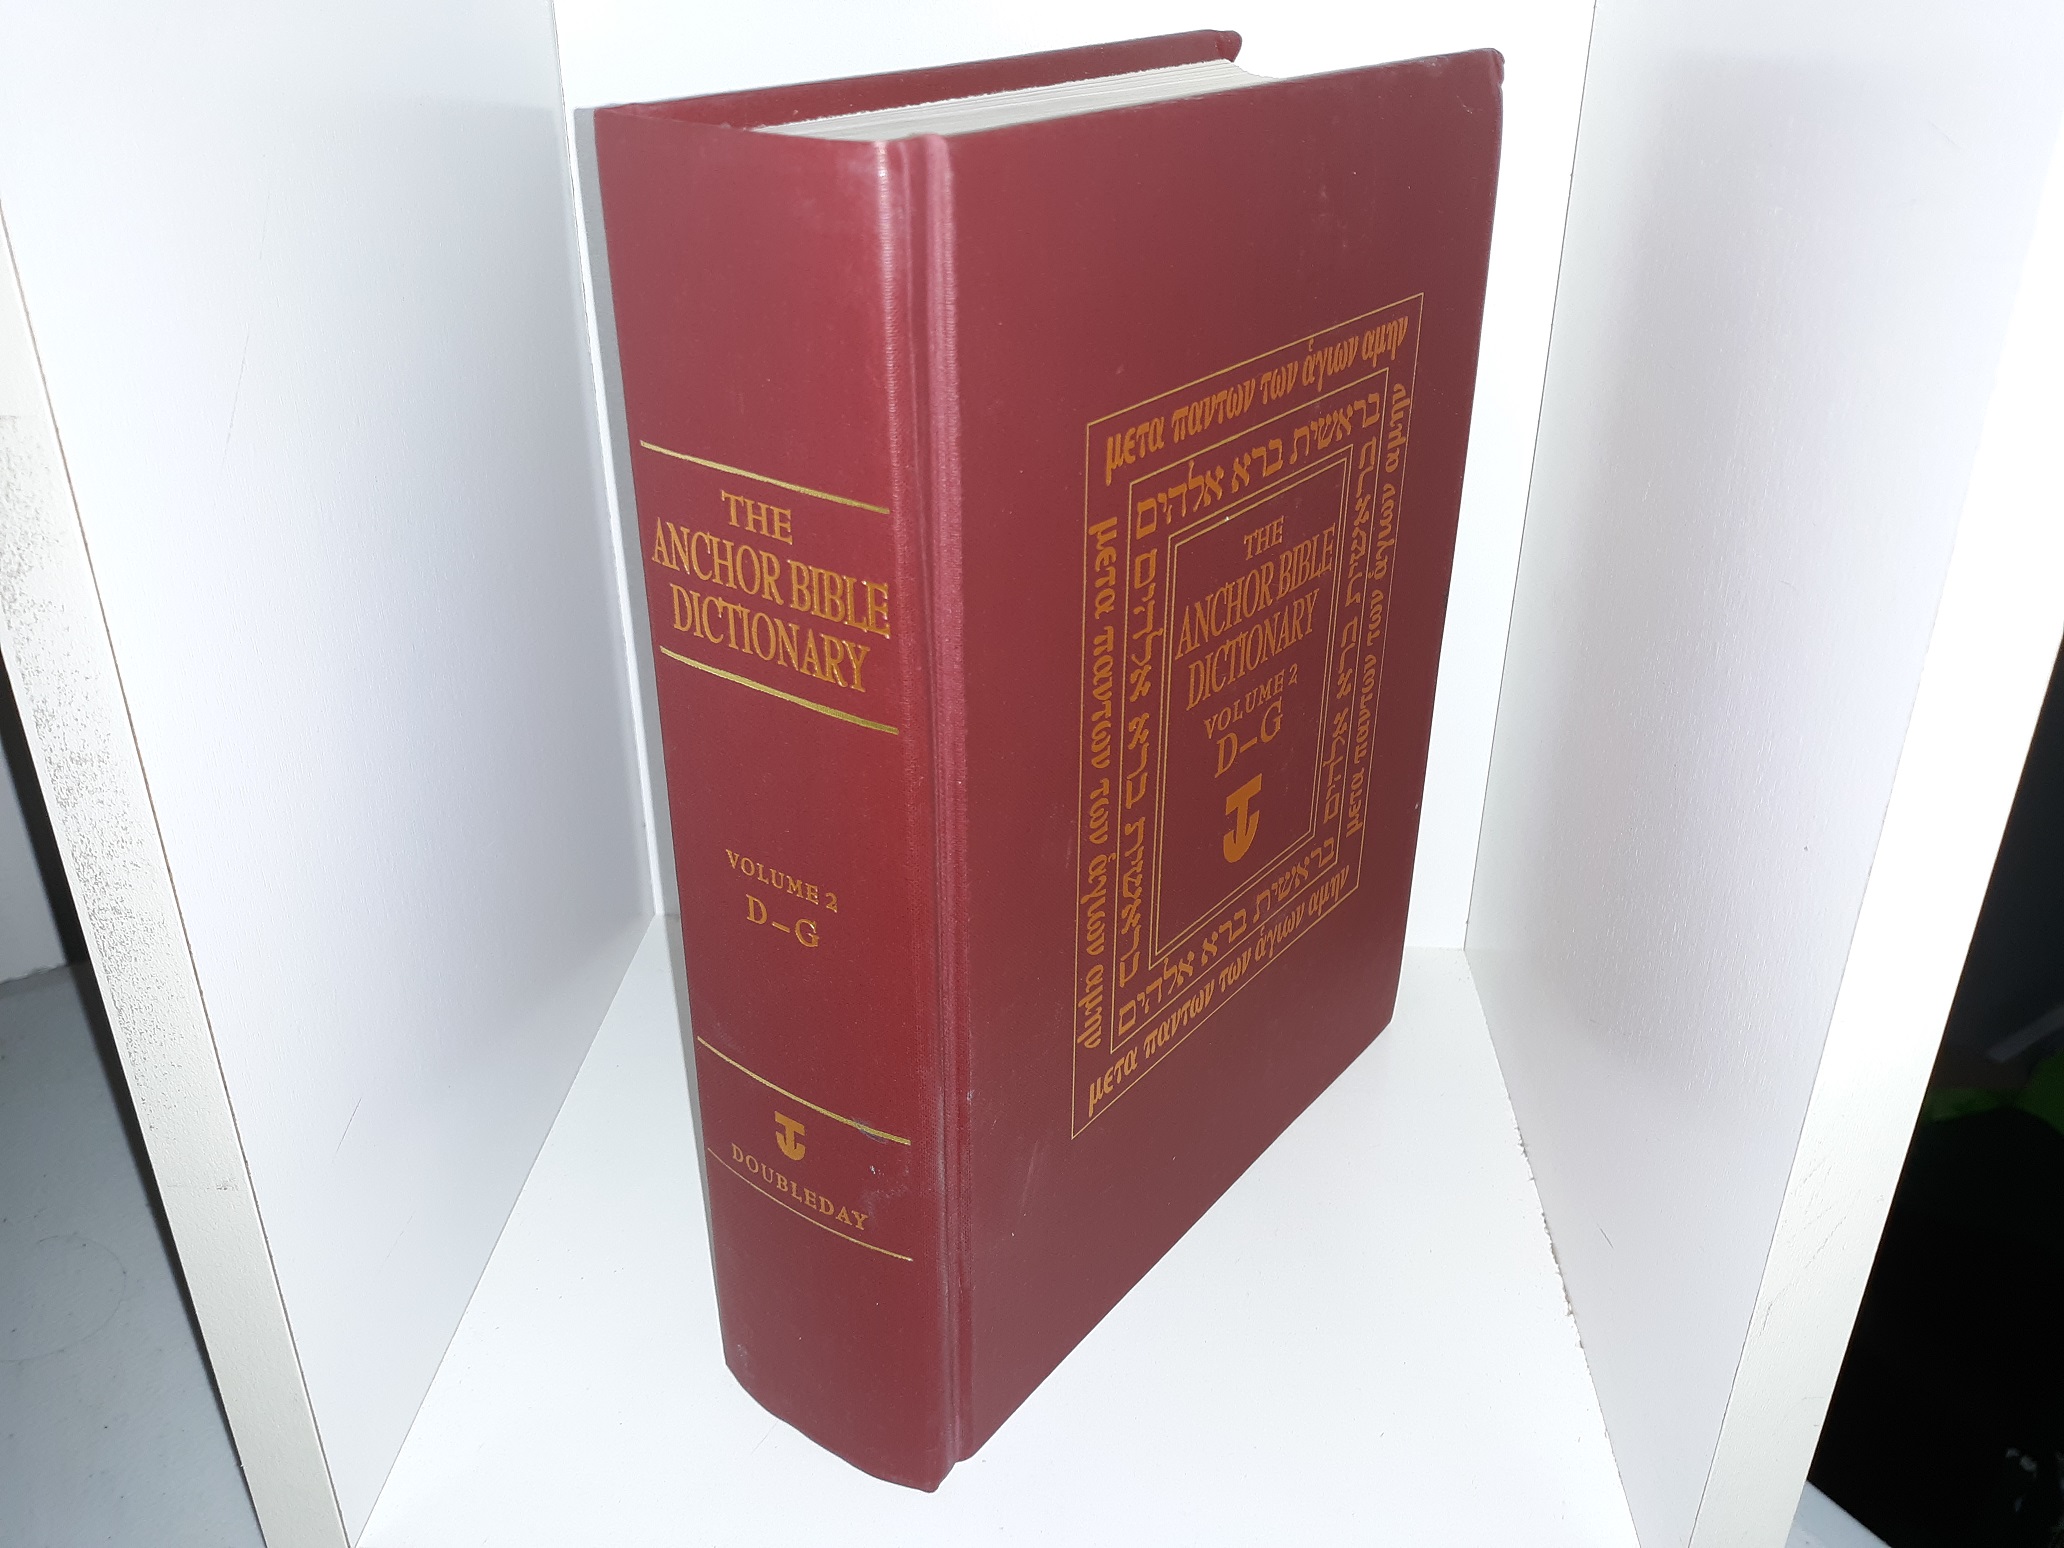 The Anchor Bible Dictionary Vol 2 D G 1992 ~ Edited By David Noel Freedman Eborn Books 9092